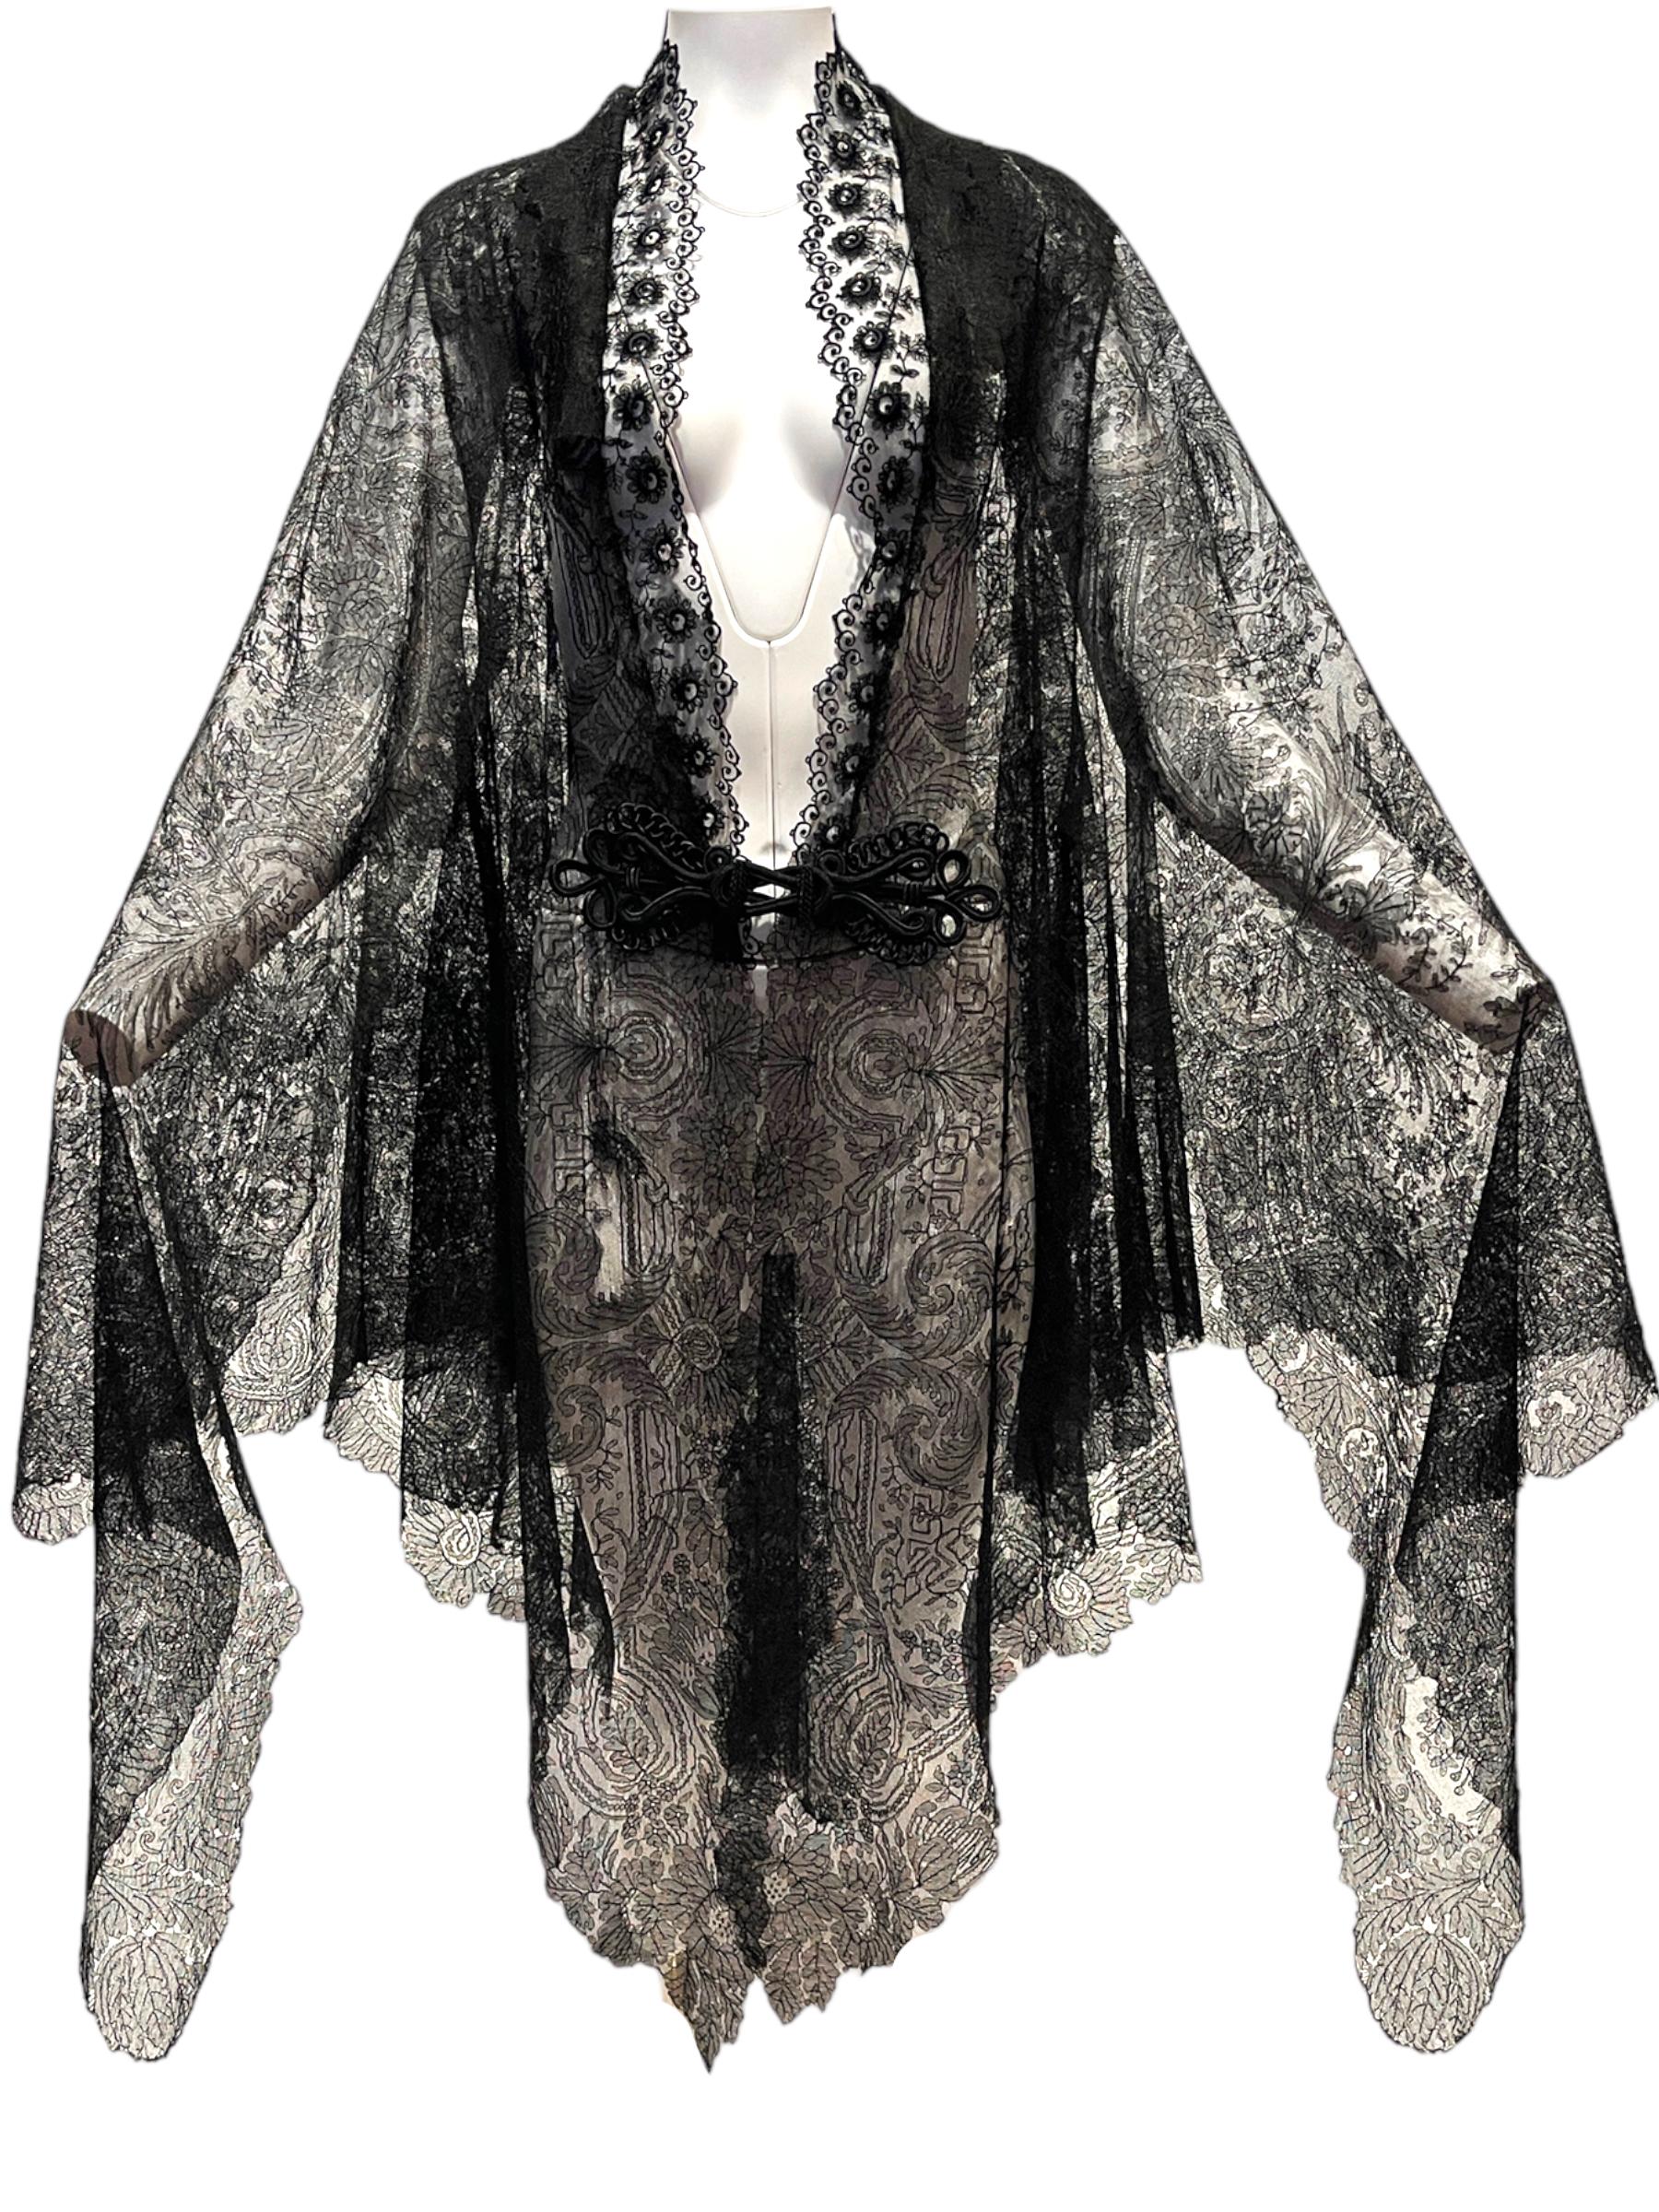 MORPHEW ATELIER Black Antique Silk Chantilly Lace Caped Duster In Excellent Condition For Sale In New York, NY